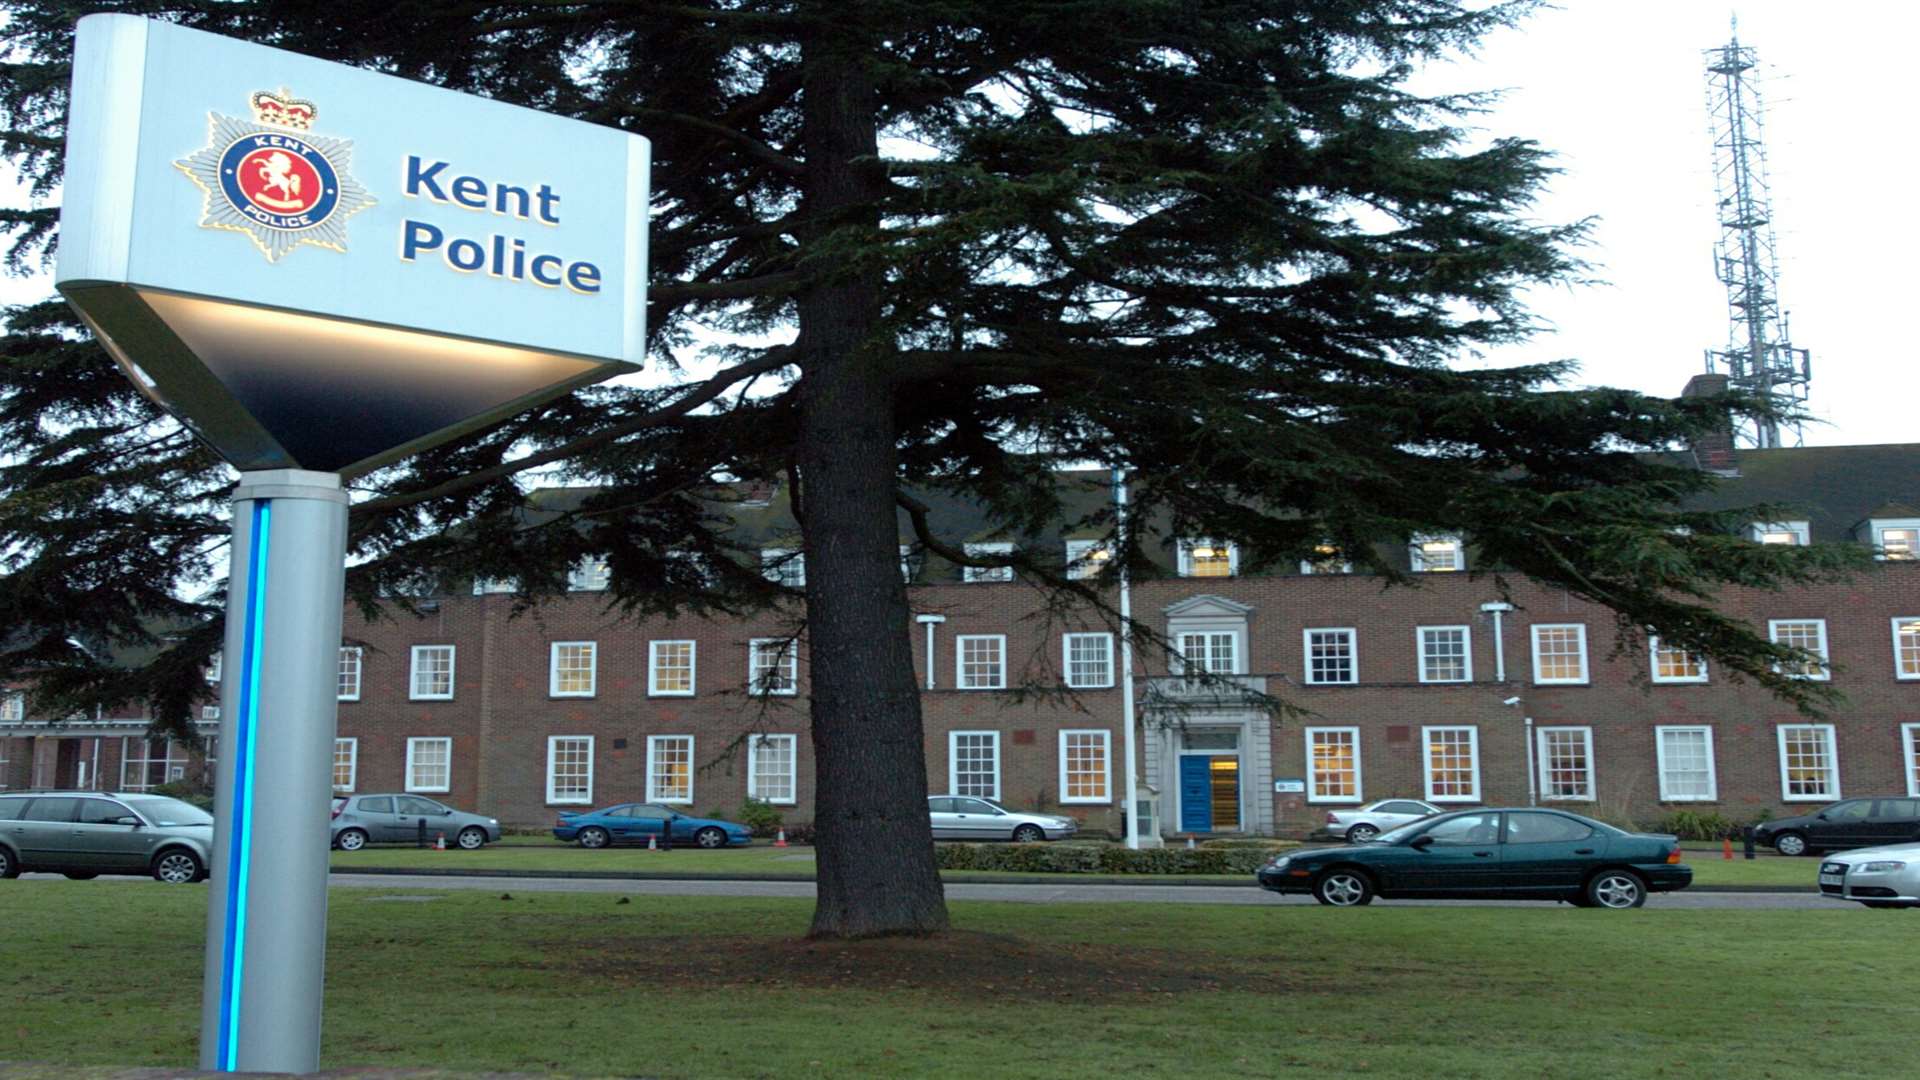 Kent Police HQ in Maidstone